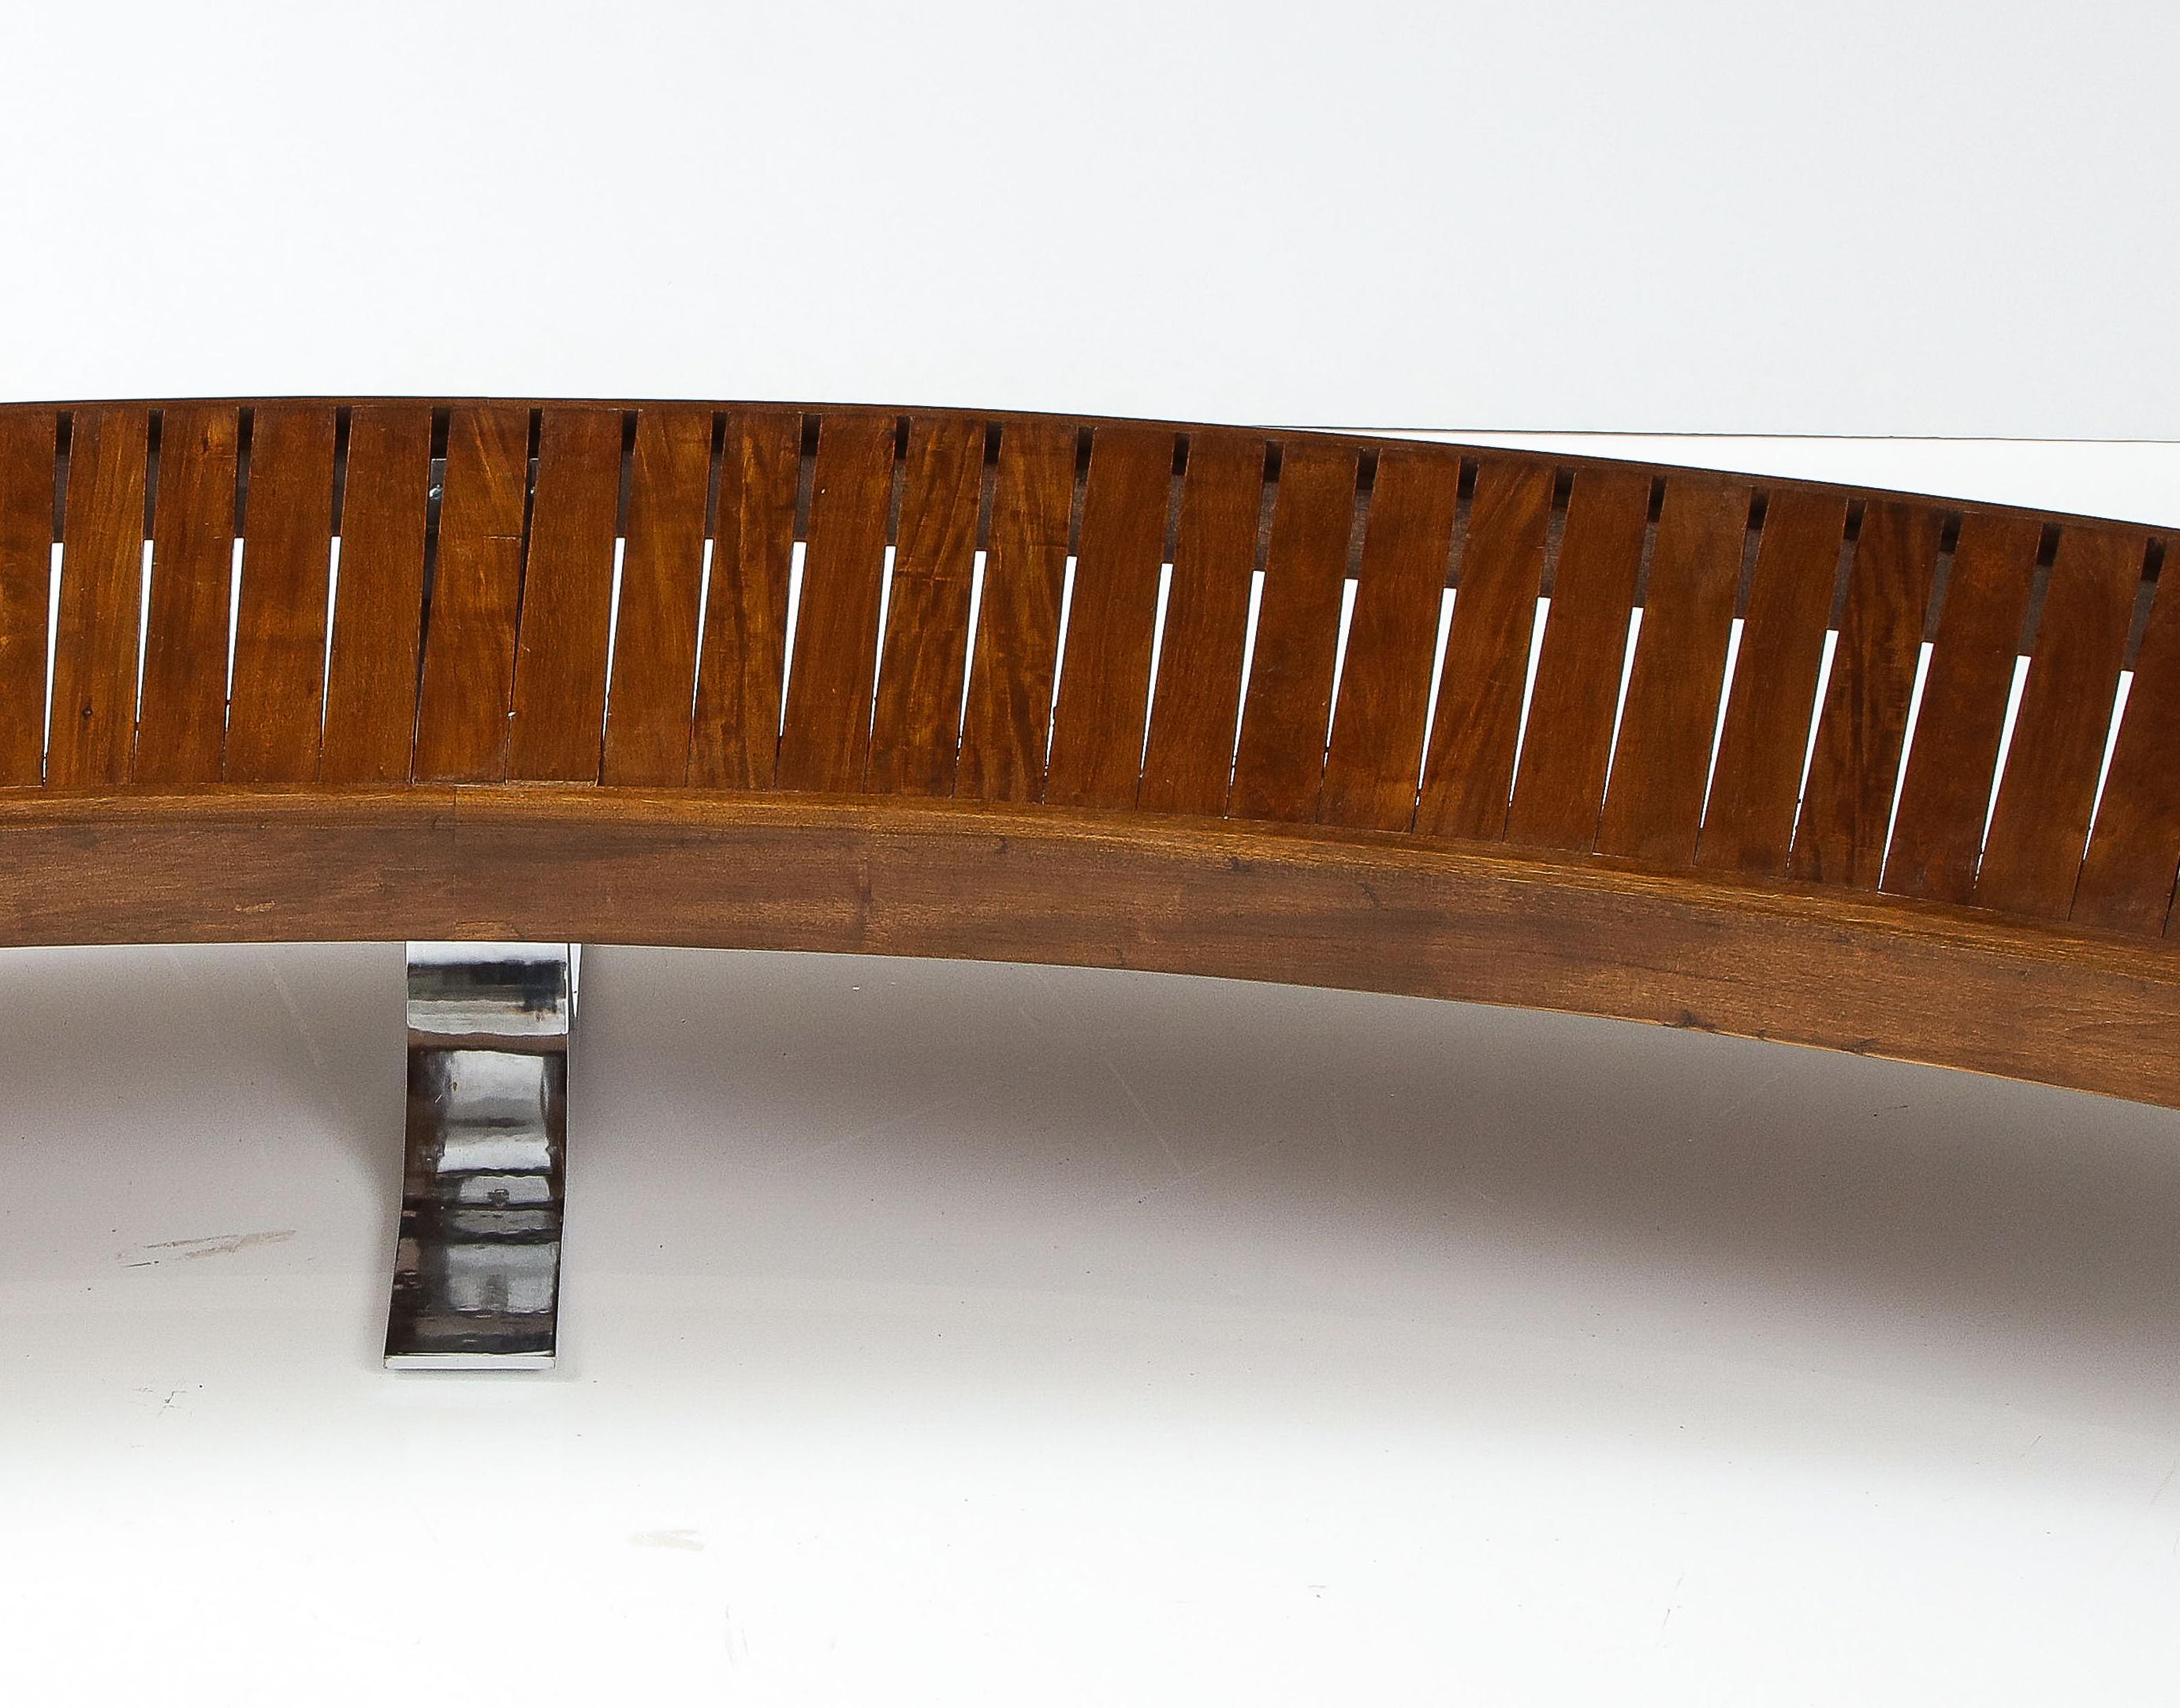 Mid-Century Modern solid peroba hardwood curved slat bench by Forma Brazil, 1960's

Manufactured by Forma Brazil circa 1960's in solid Peroba hardwood and finished in natural varnish. 
This curvaceous bench was done in a beautiful solid wood and it